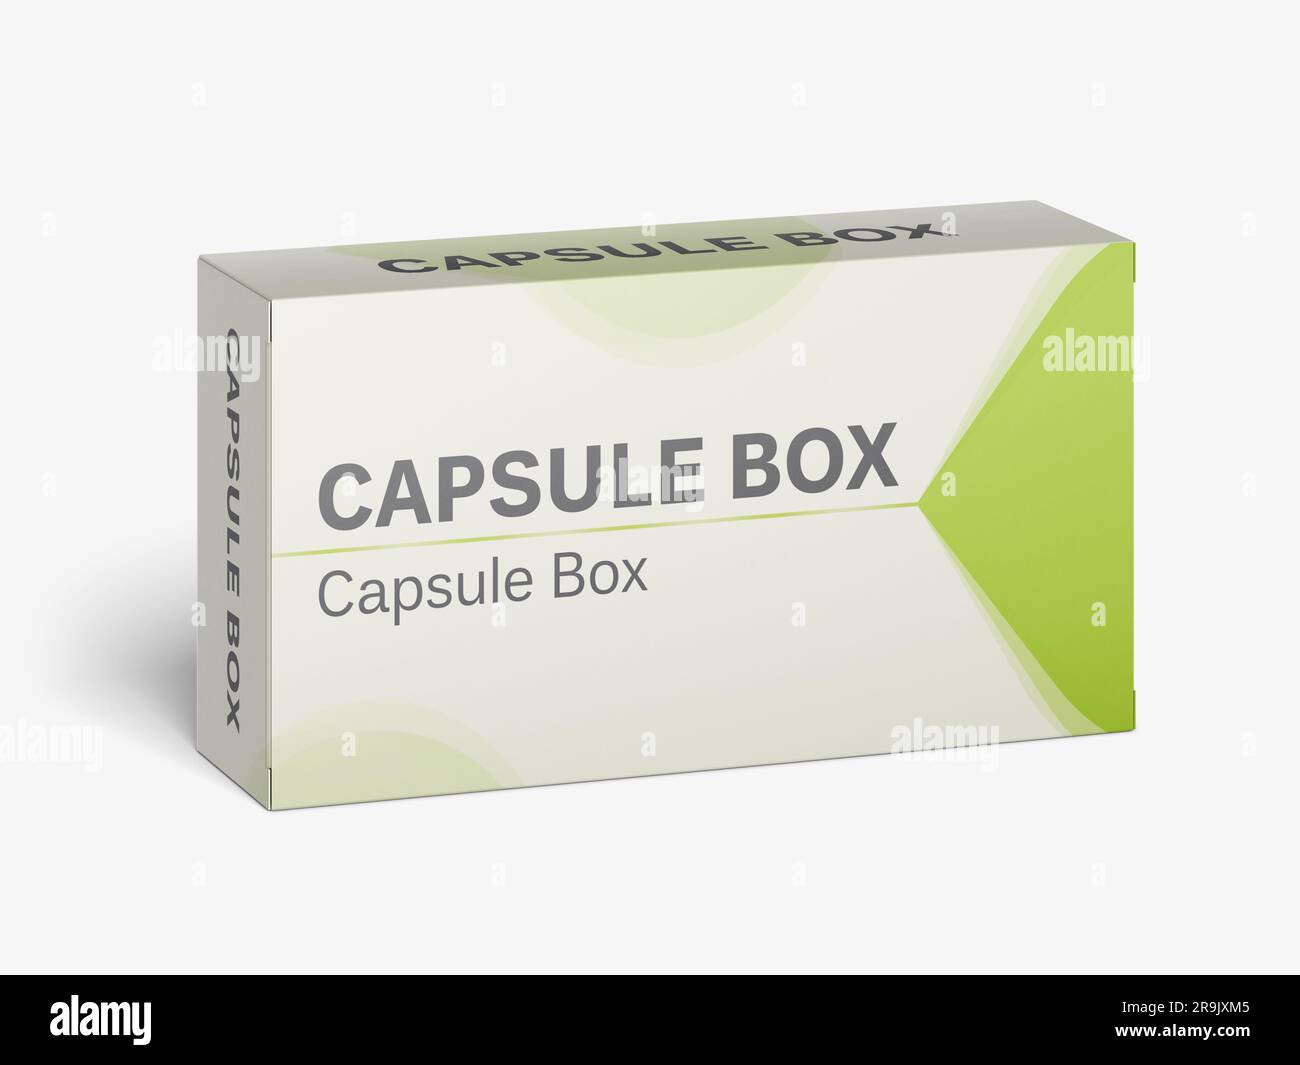 Tablet & capsule products mockup image Stock Photo